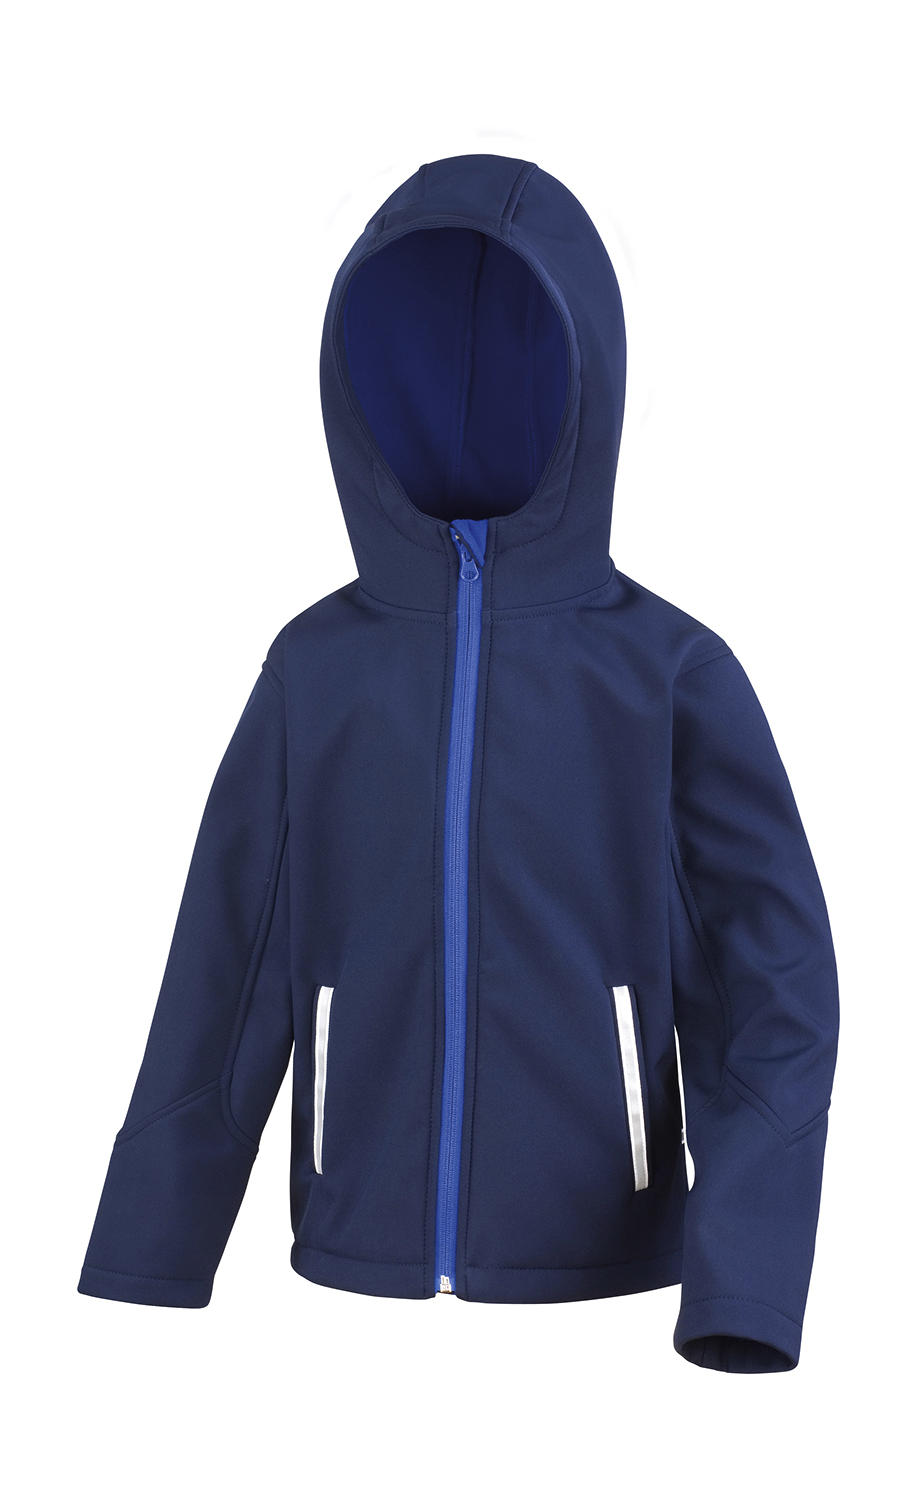  Kids TX Performance Hooded Softshell Jacket in Farbe Navy/Royal